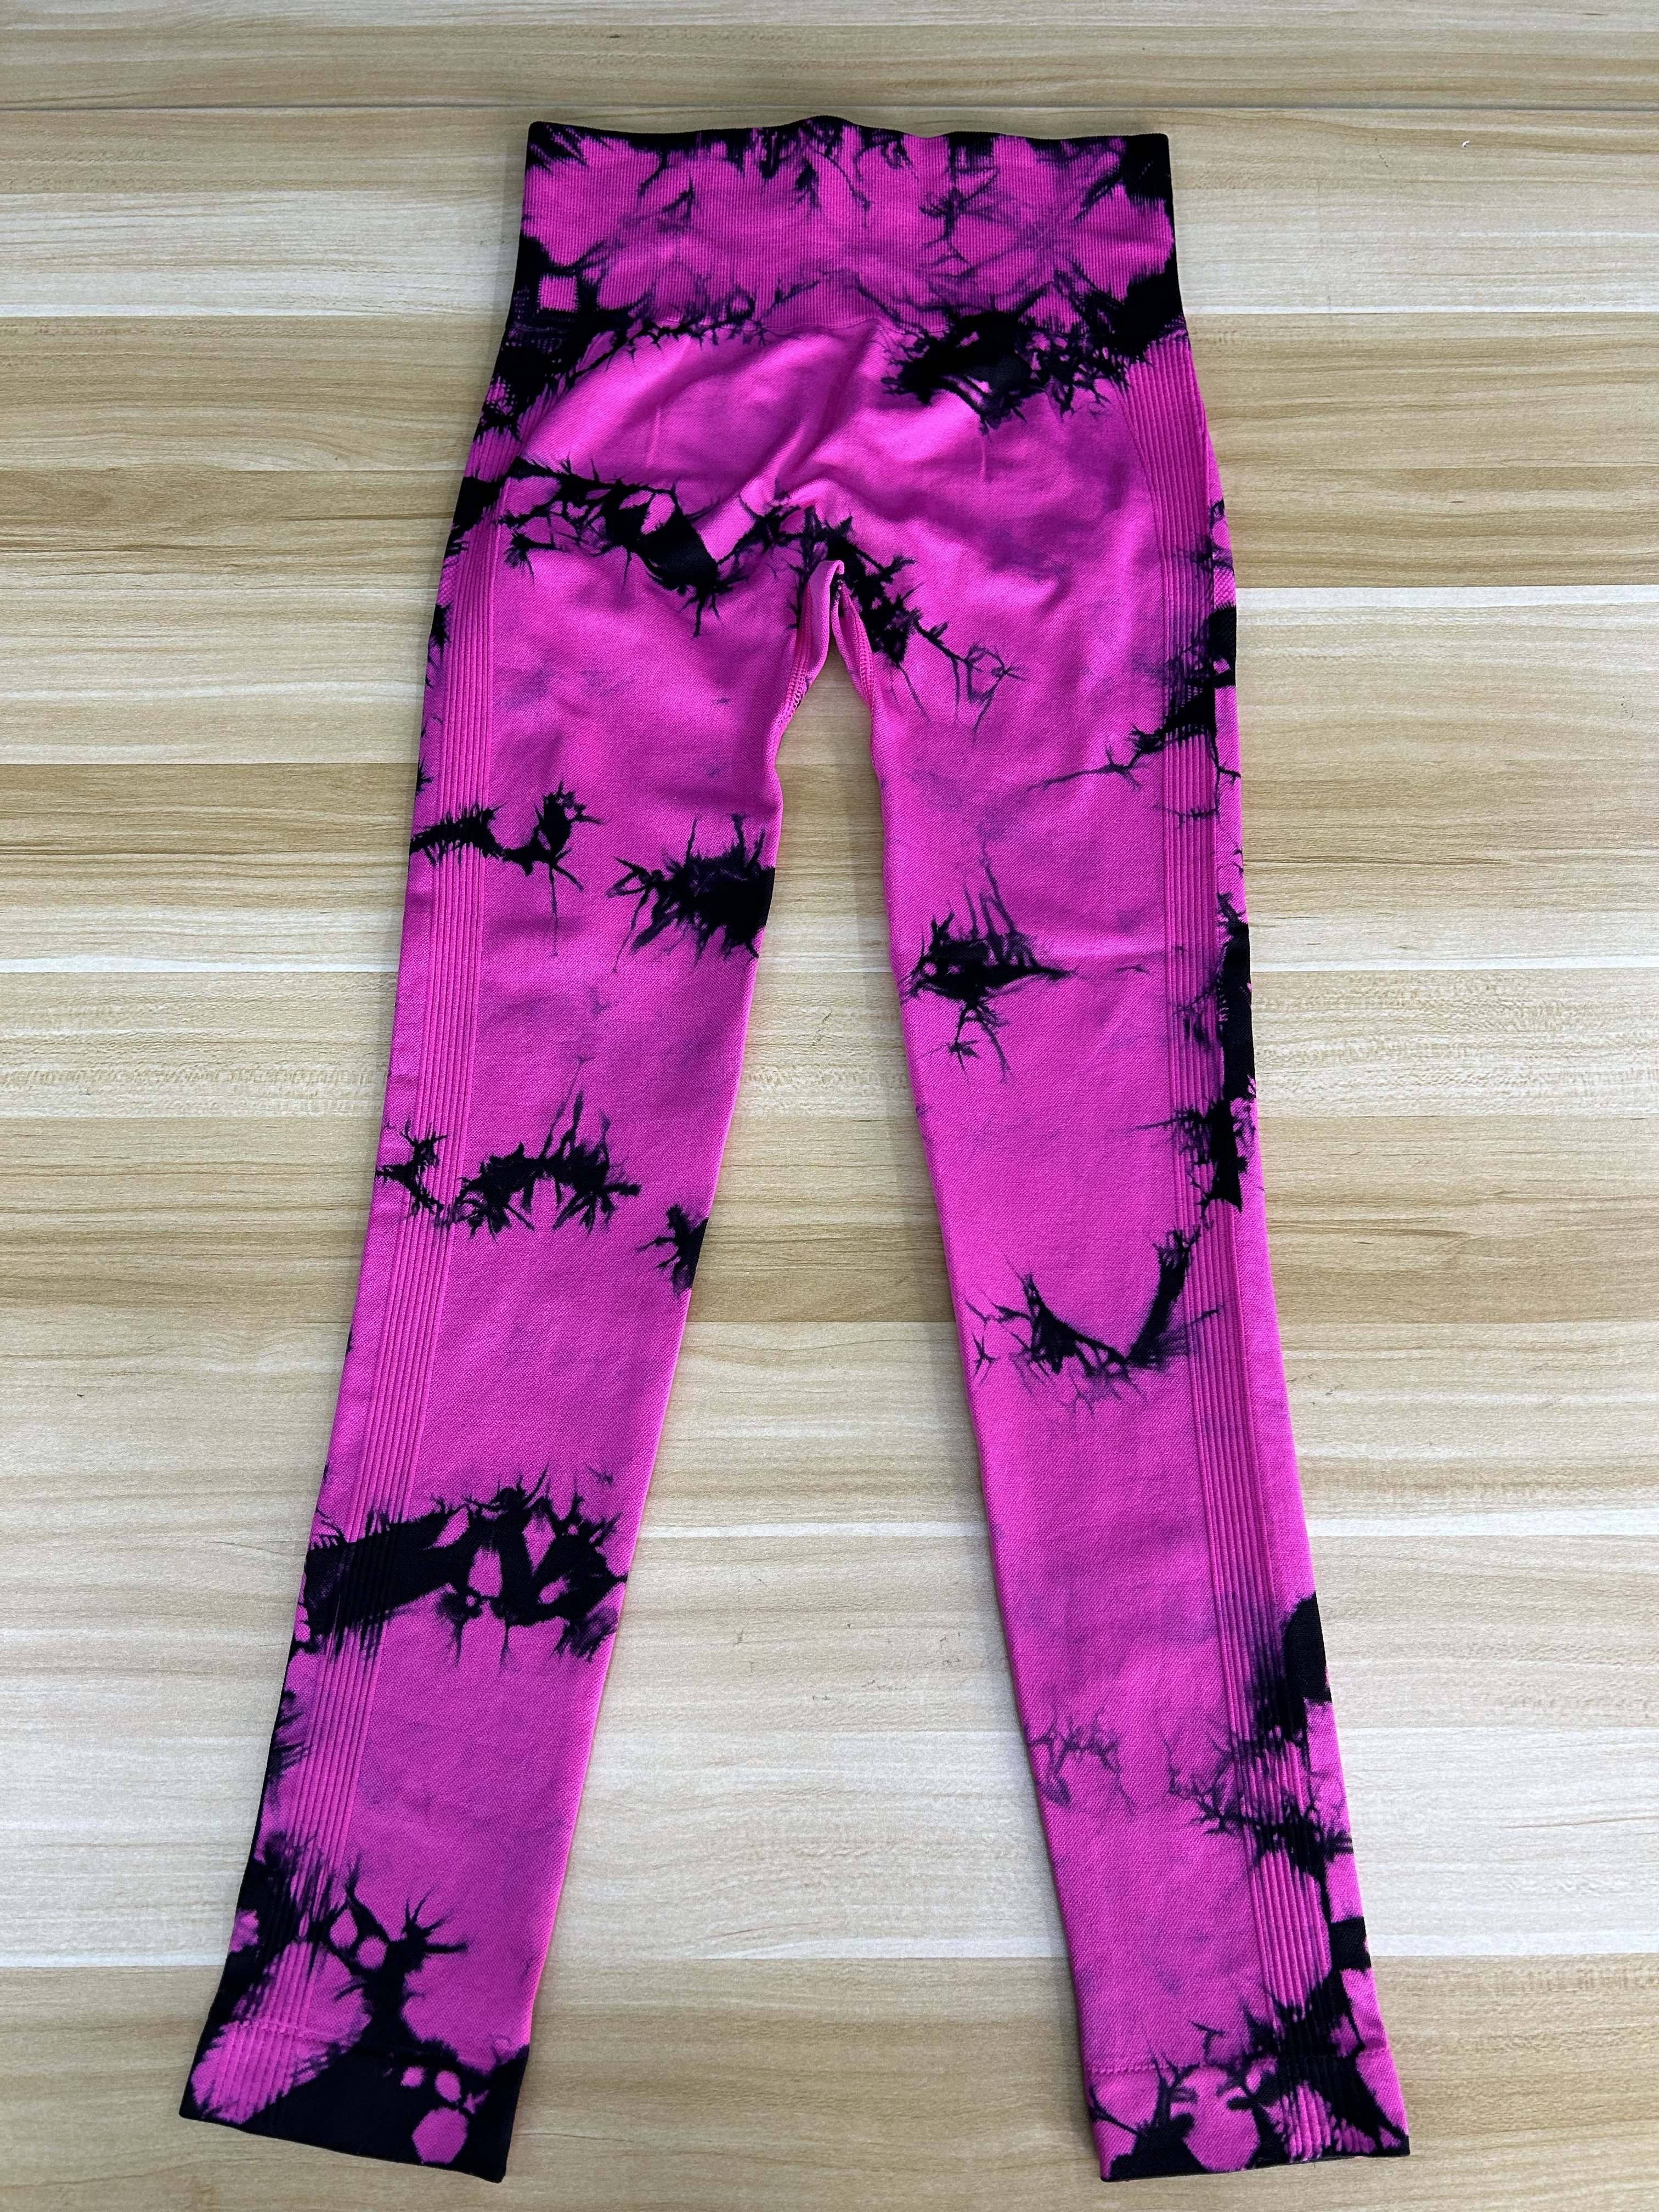 Tie Dye Stretchy Seamless Yoga Sports Pants, Breathable High Waist  Butt-lifting Fitness Gym Leggings, Women's Activewear